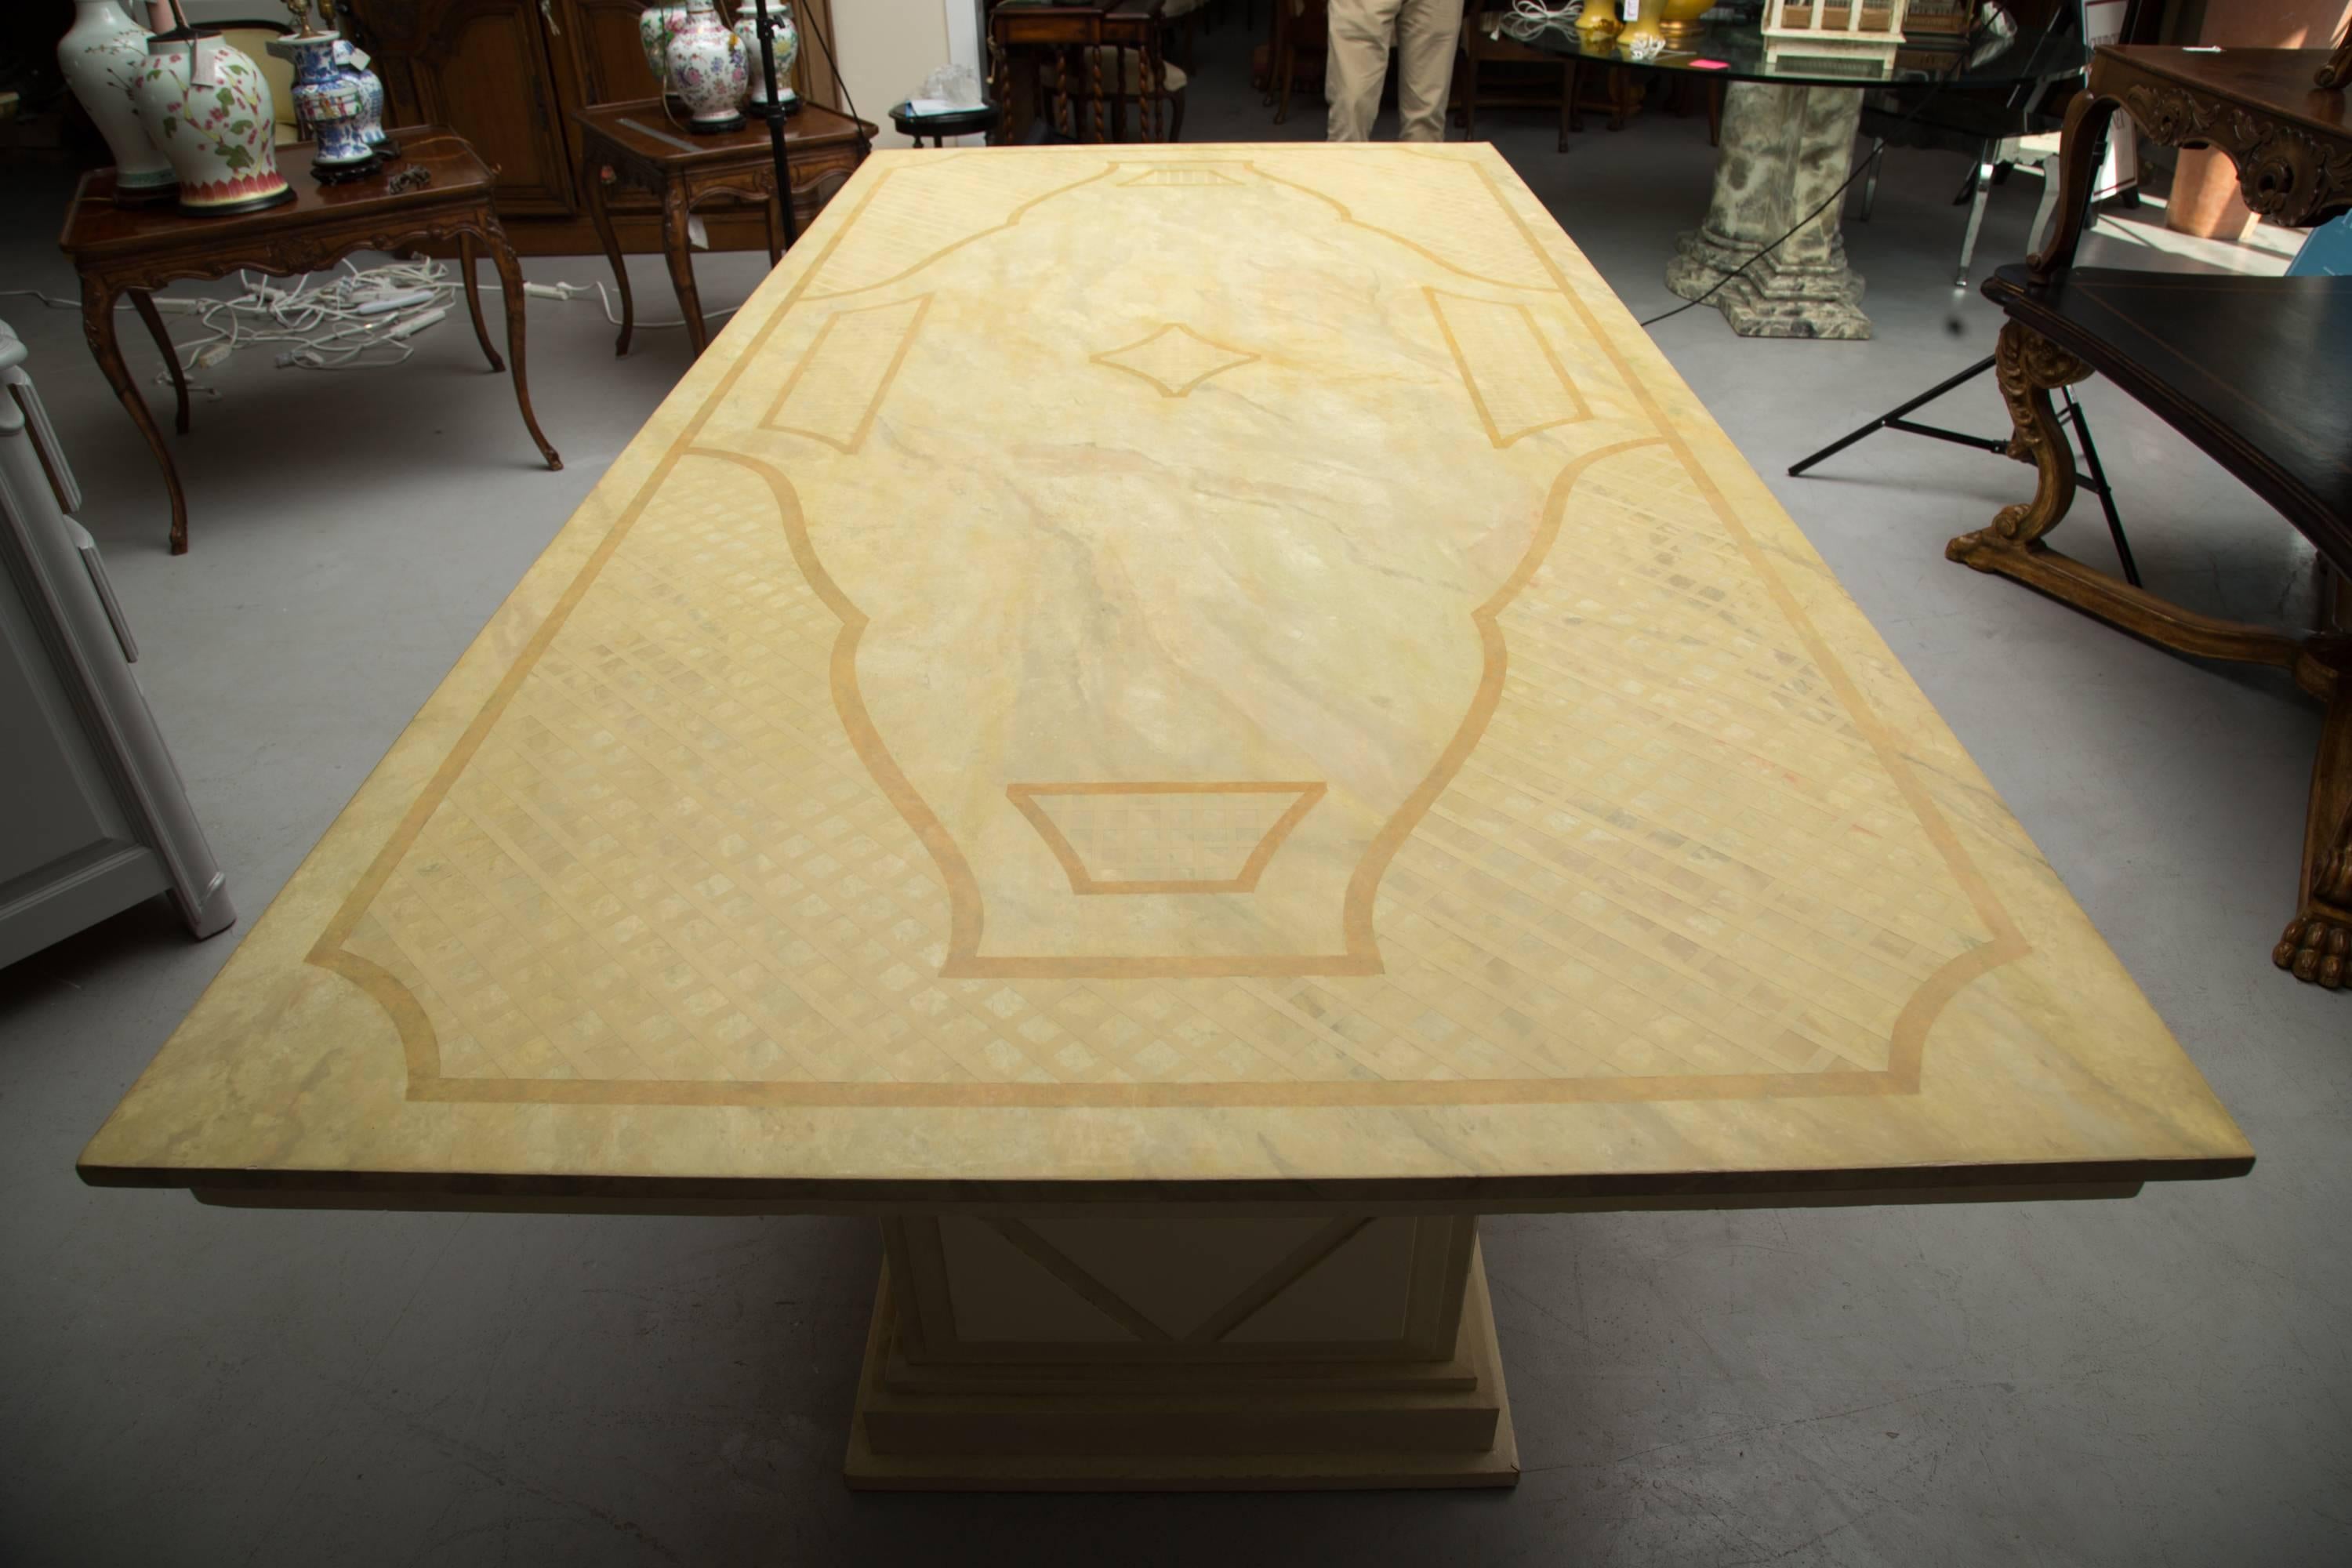 This is an elegant Italian dining table. The top is custom painted with a faux Jerusalem limestone finish, and embellished with a painted decorative ornamentation. The case piece supported by two plinths with geometric architectural moldings, 20th